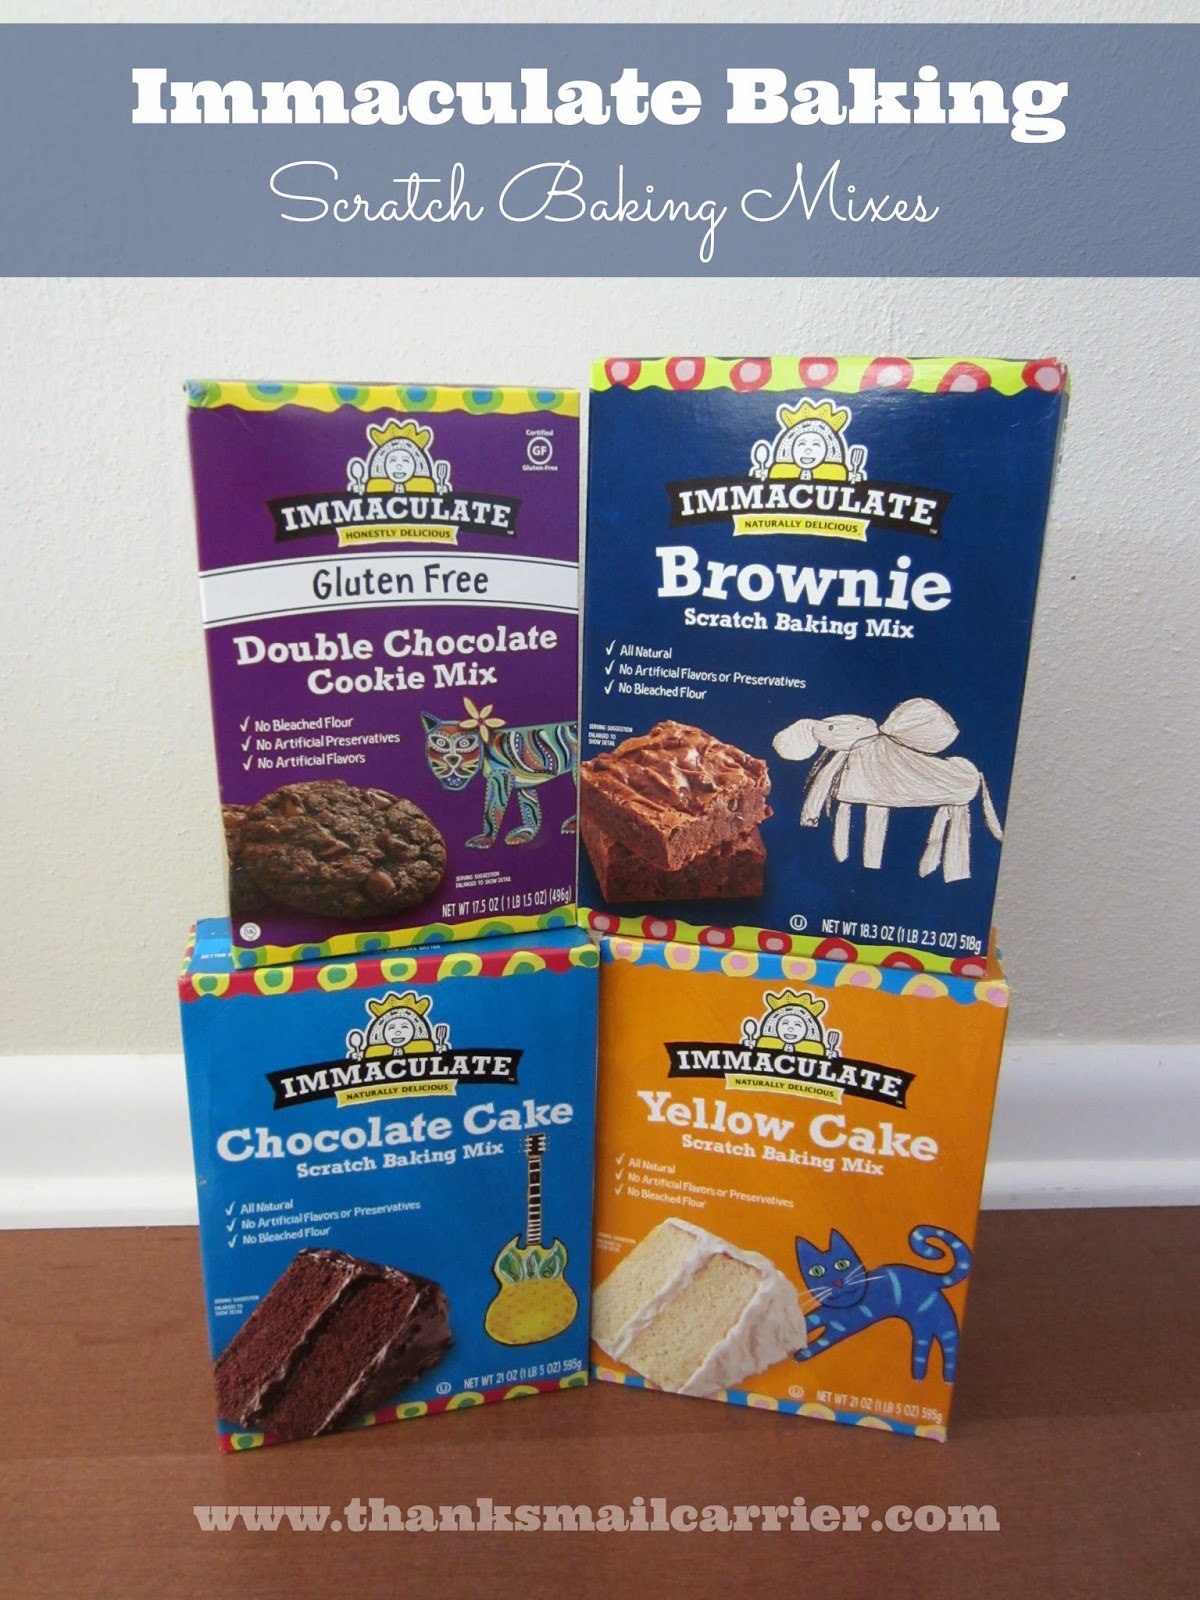 Immaculate Baking mixes